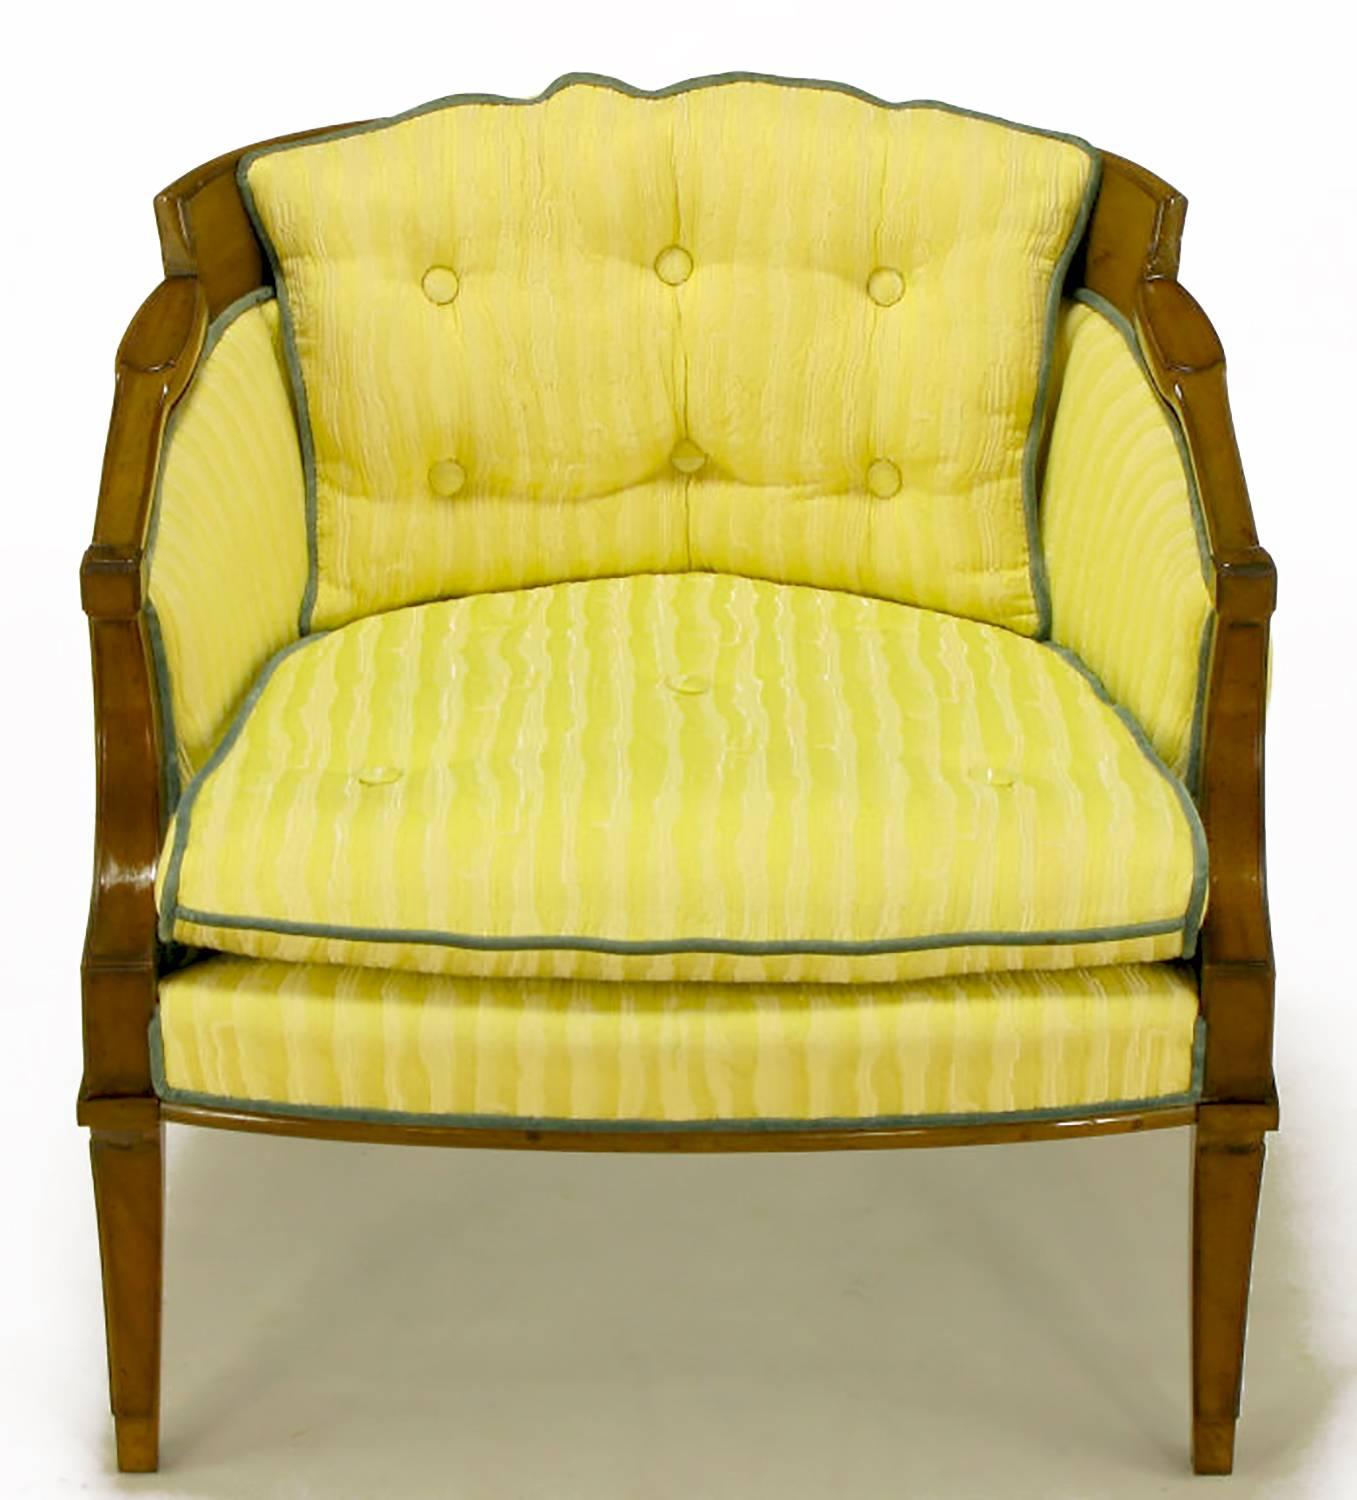 Pair of Oxford Ltd lounge chairs with carved walnut Regency frame. Saber front and back legs with nicely detailed arms and back. Fixed button tufted back cushion, loose seat cushion in a saffron striped linen and silk blend upholstery, with